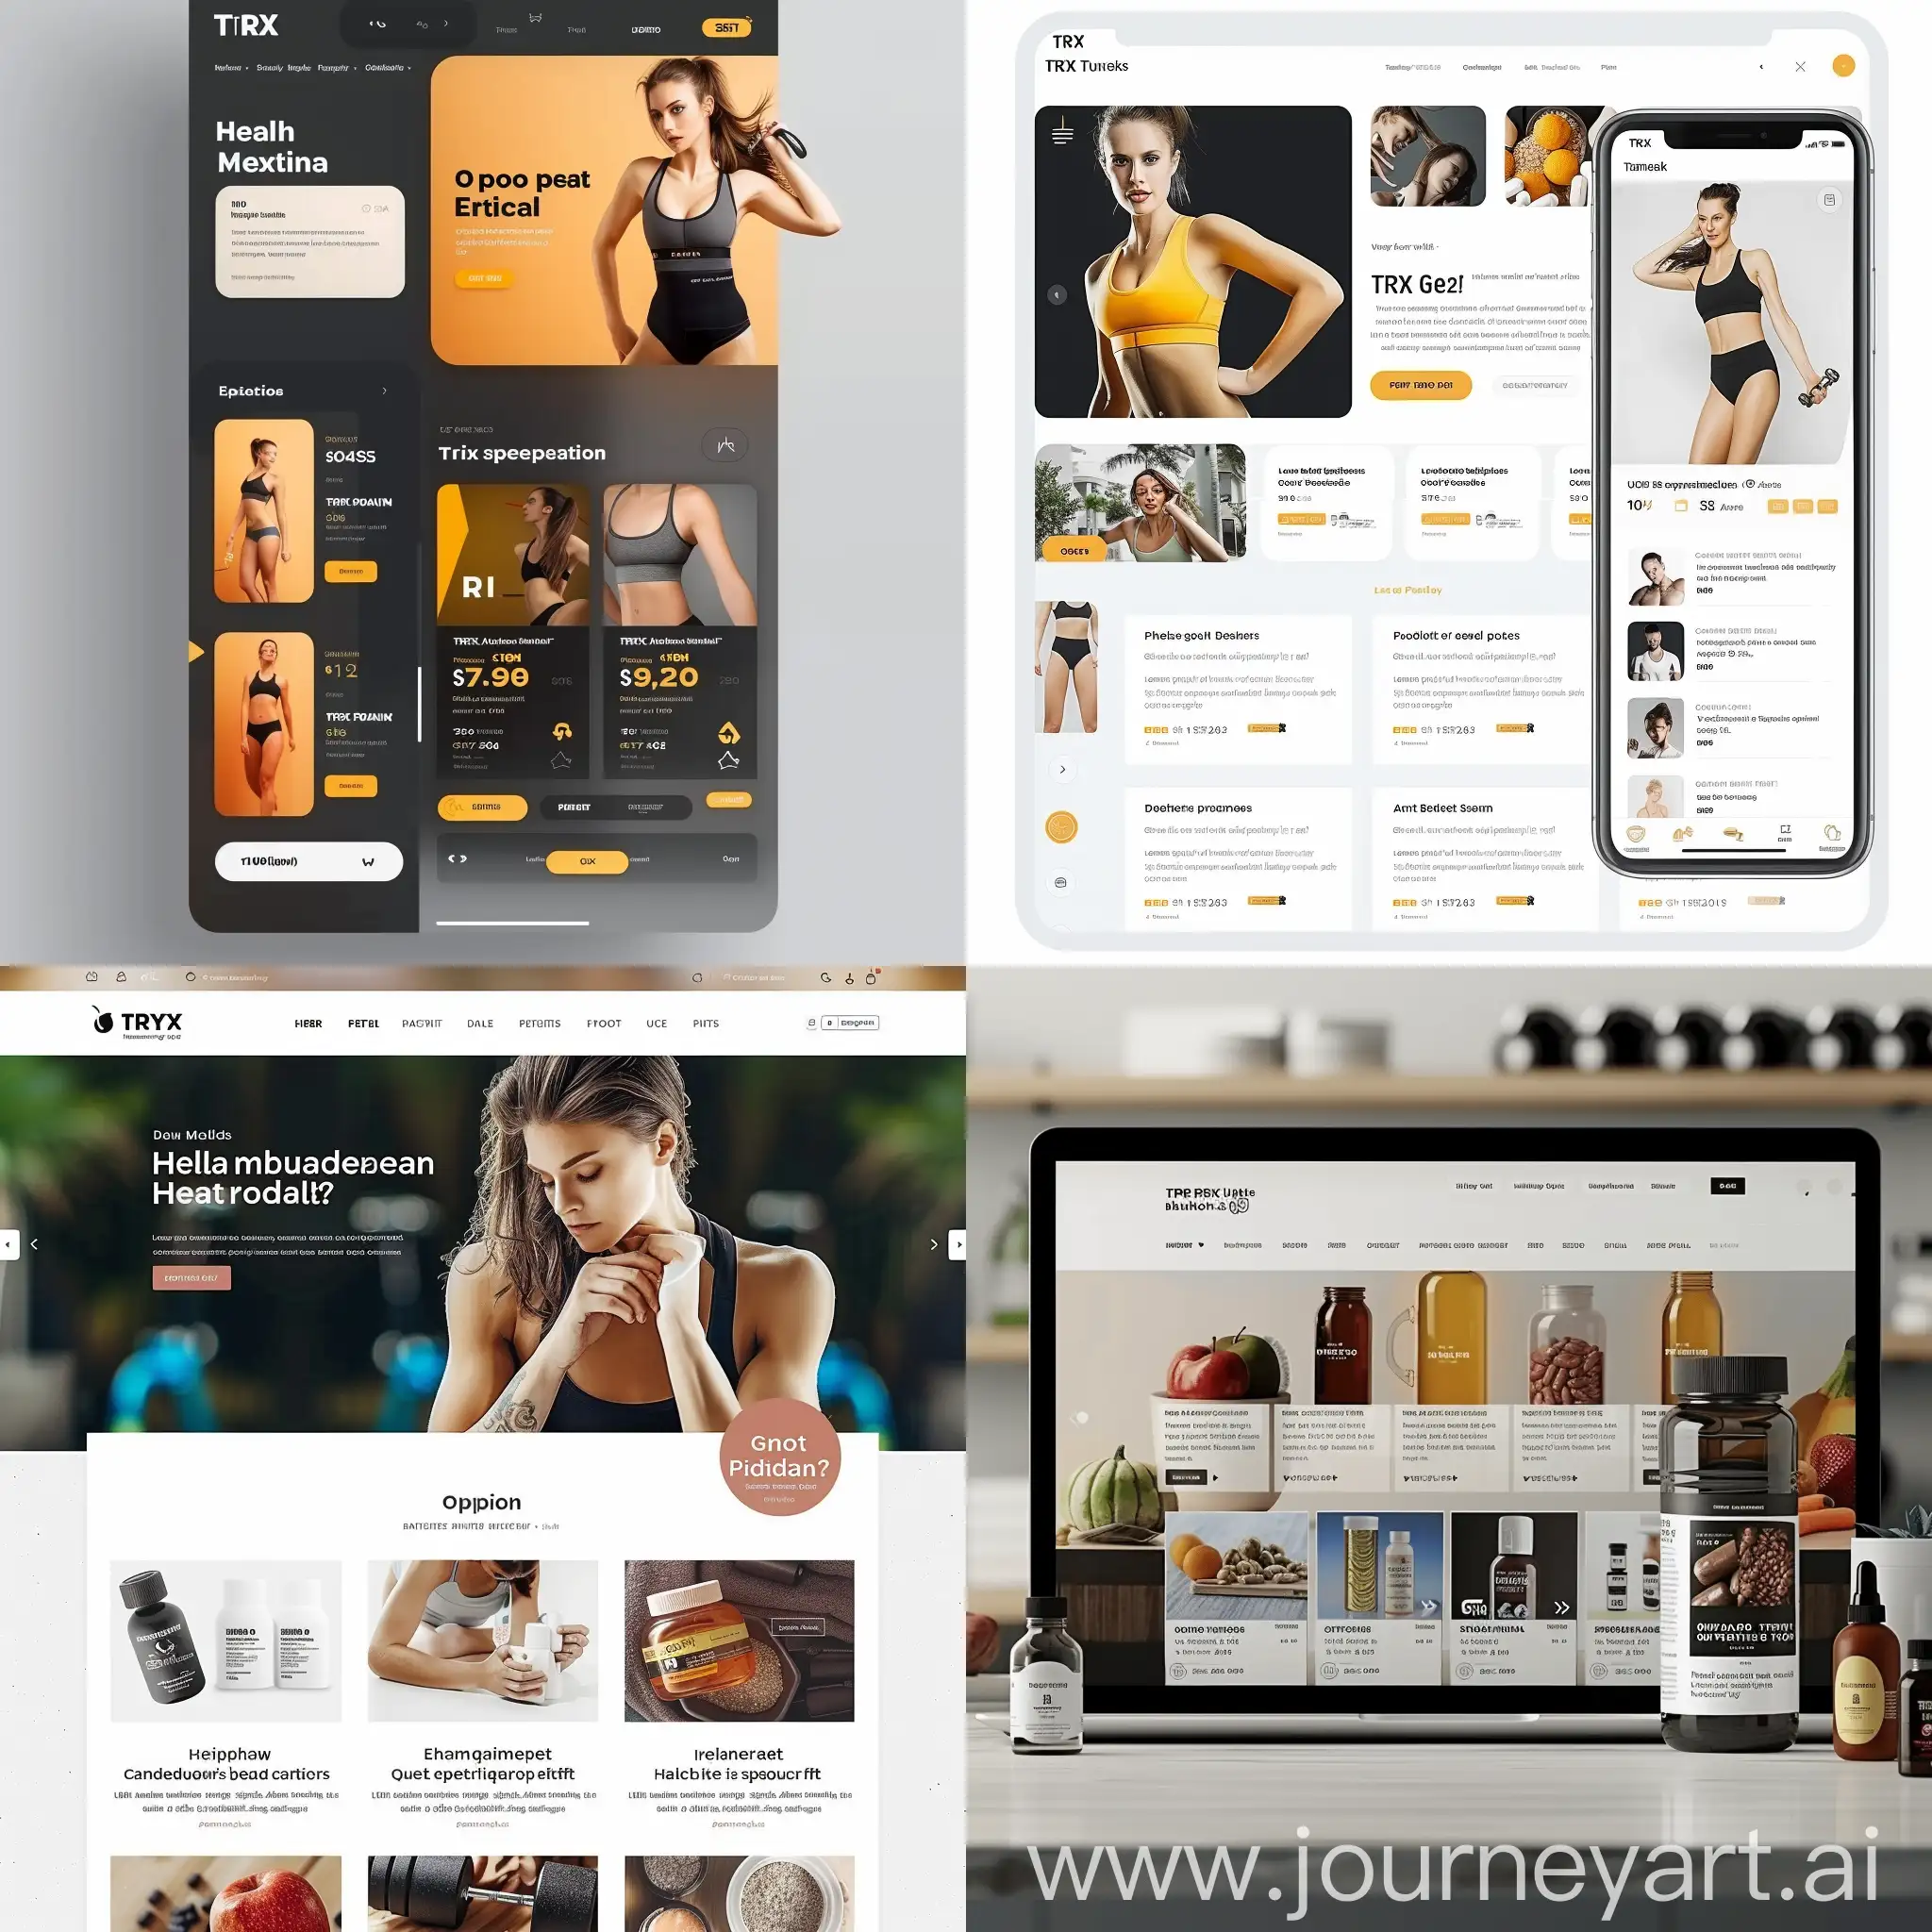 UI for website which is the web platform for the users in which they can buy trx training, regarding health and specially read the articles regarding health and fitness, health informations, beauty tips, skin care, food recipes, latest products regarding on health like vitamins supplements, protein powder etc.